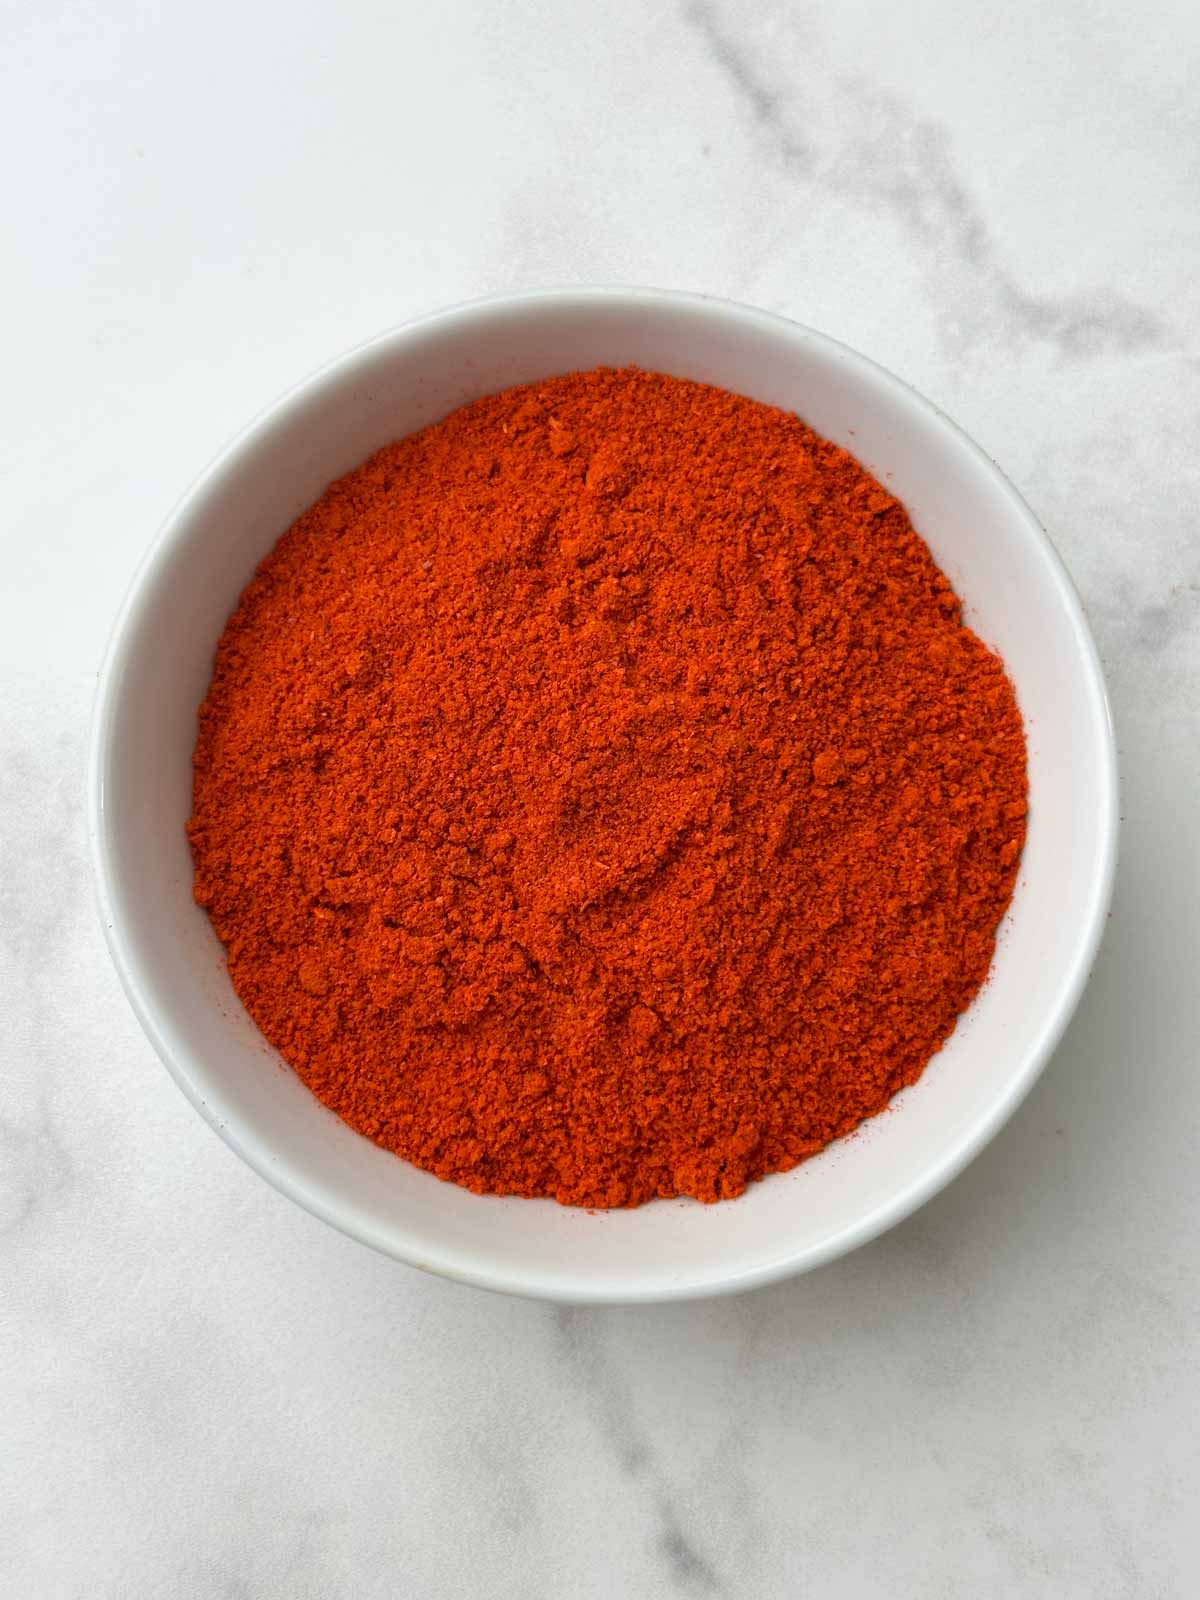 Red Chili Powder in a bowl